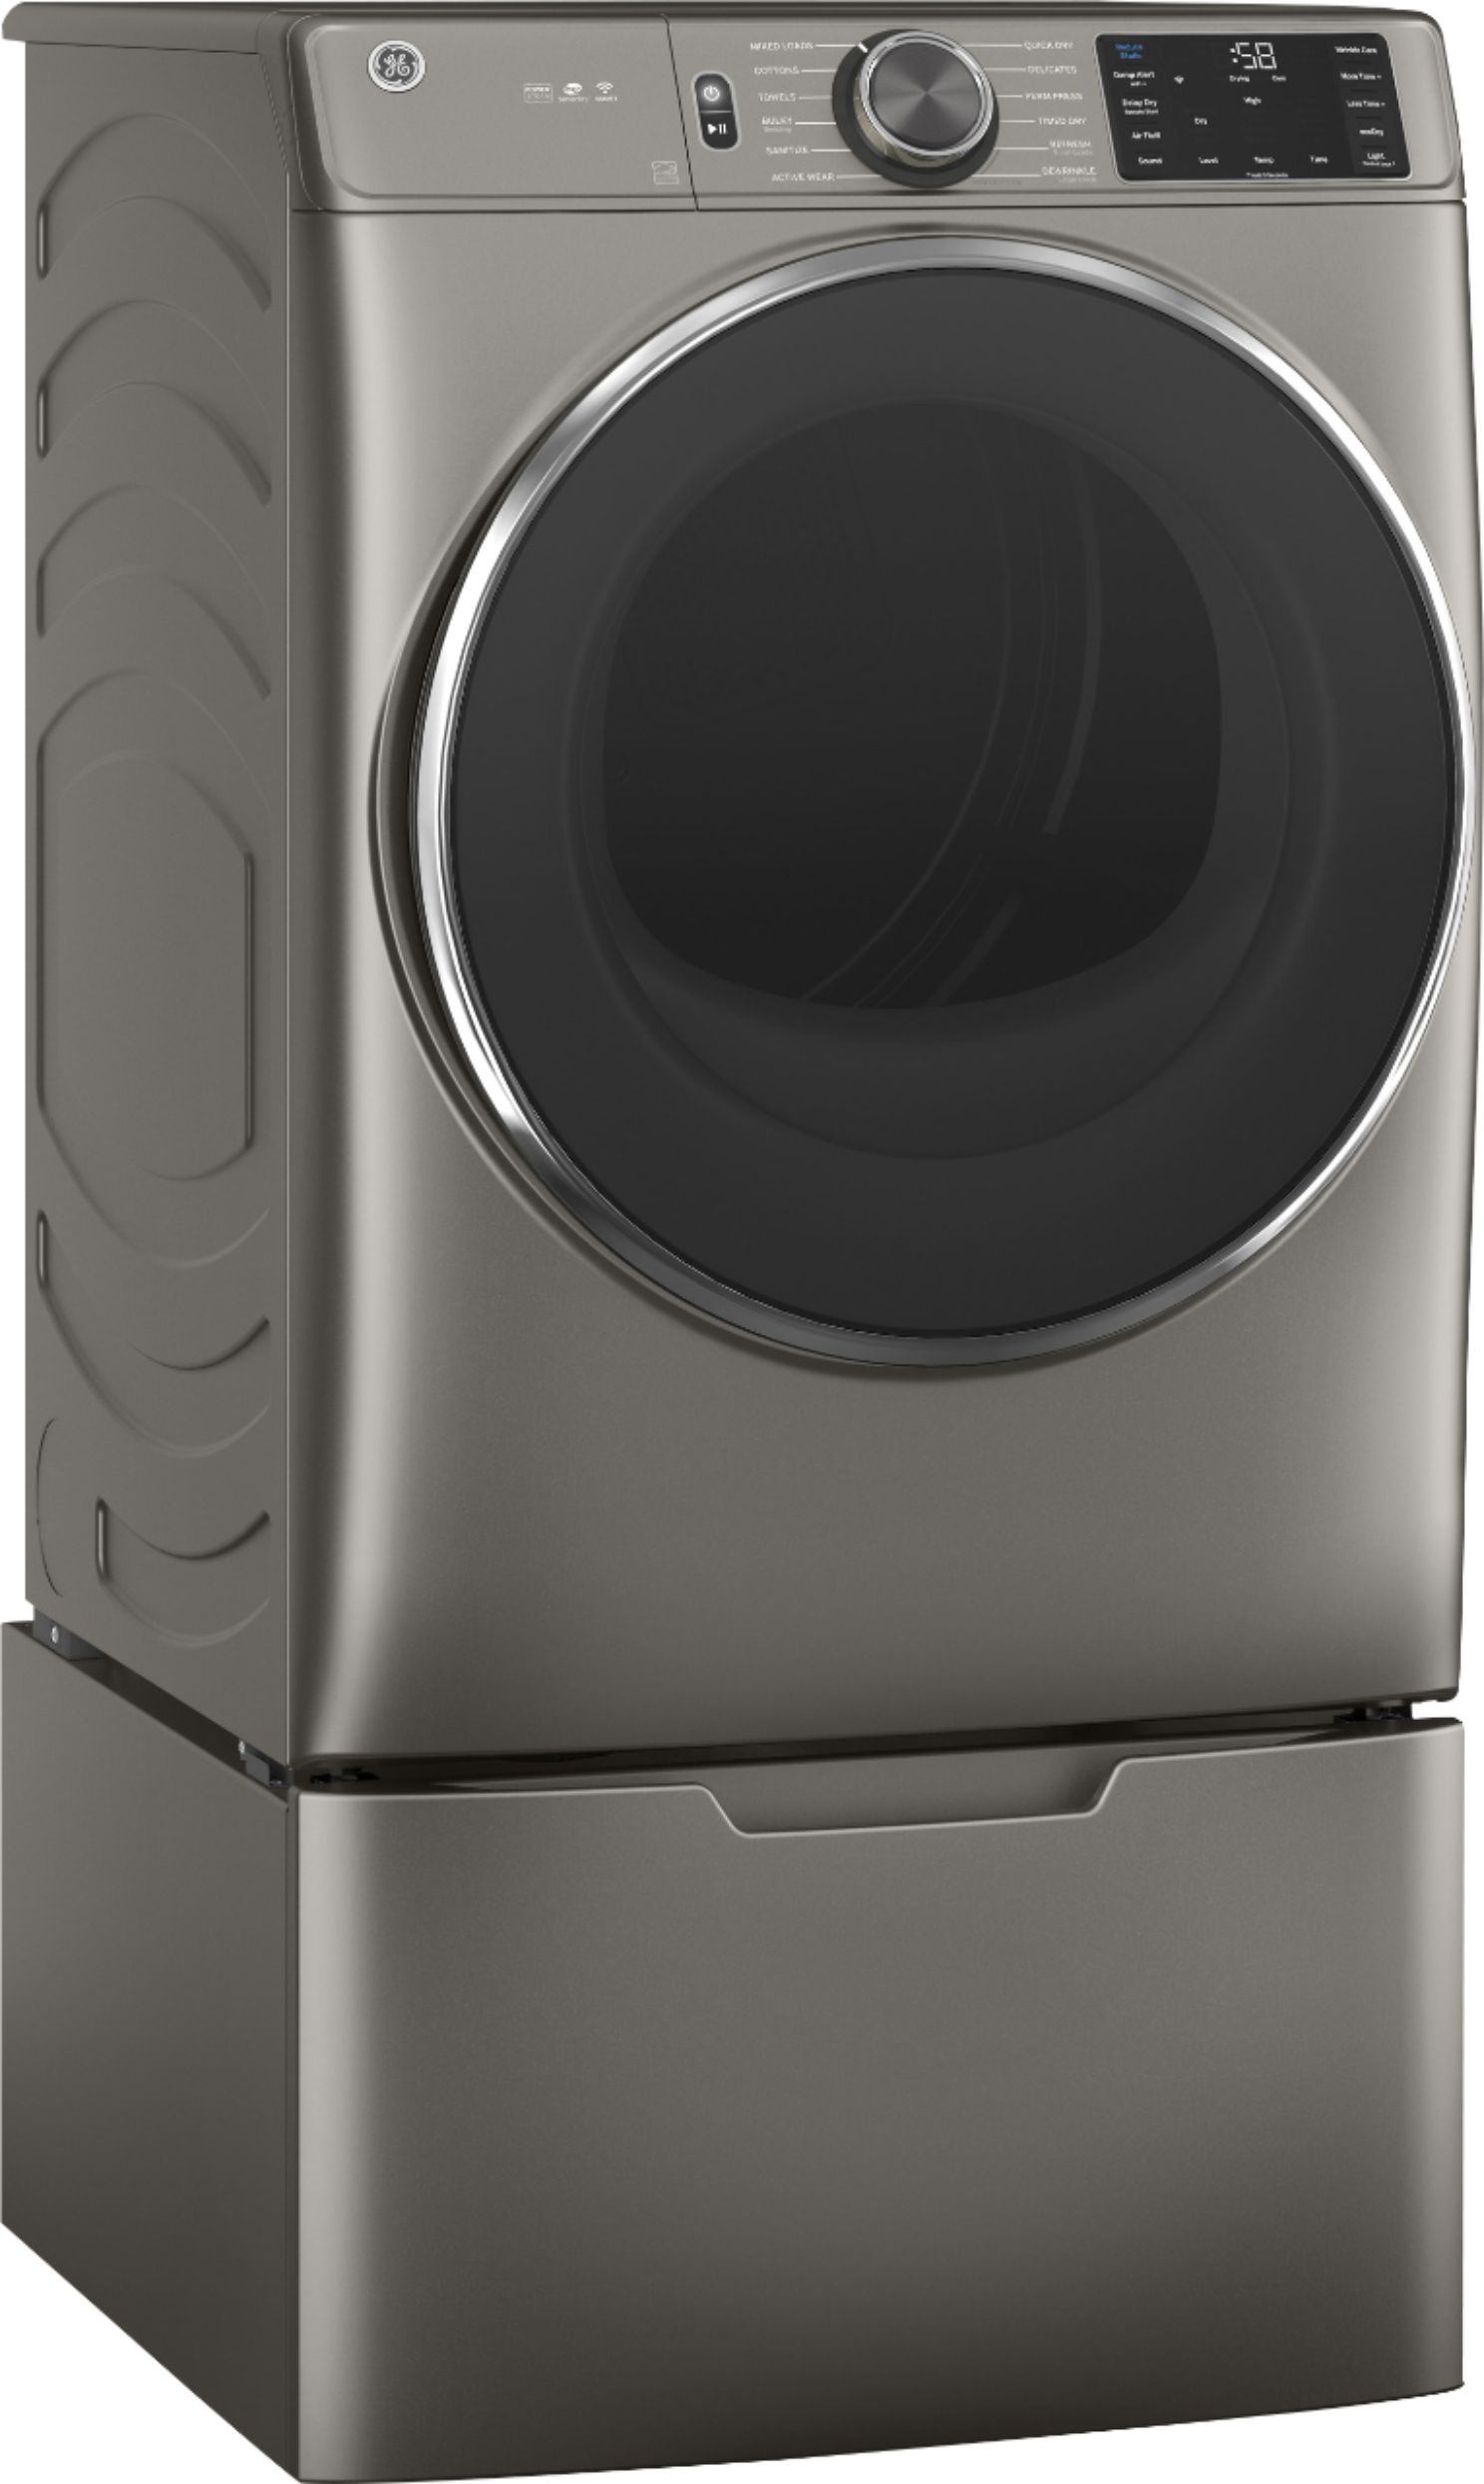 Angle View: GE - 7.8 Cu. Ft. 12-Cycle Electric Dryer with Steam - Satin Nickel